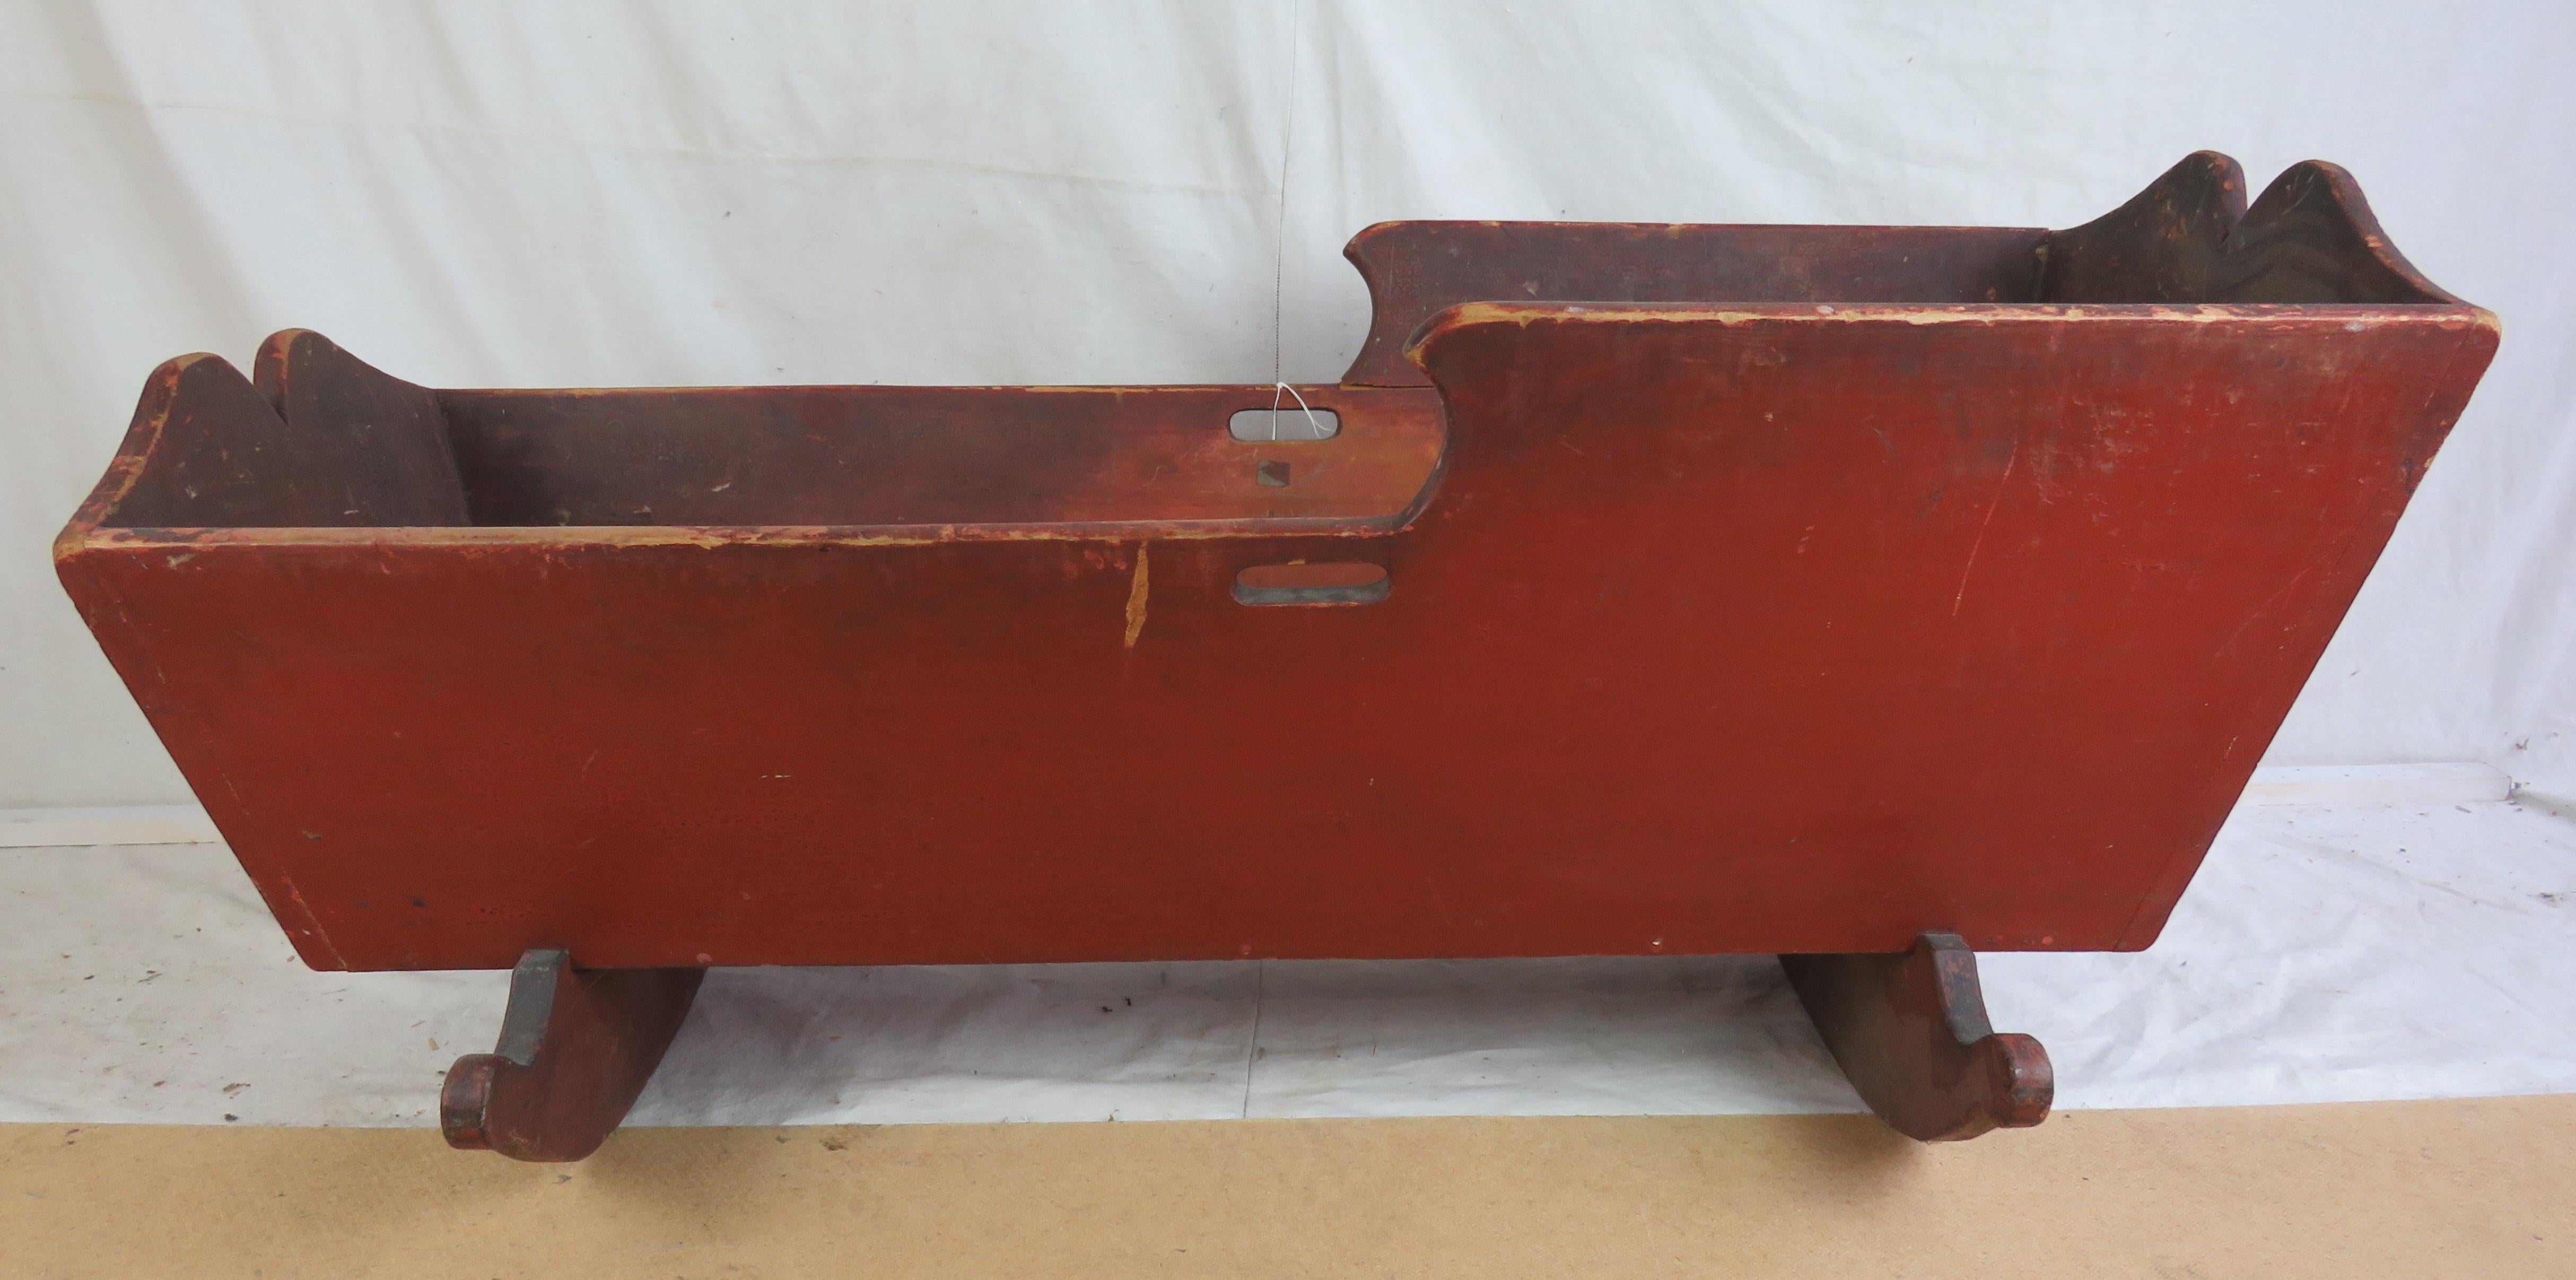 19th Century rocking cradle in original red paint, with shaped detail at head and foot, on carved rockers. Old age crack along one side.